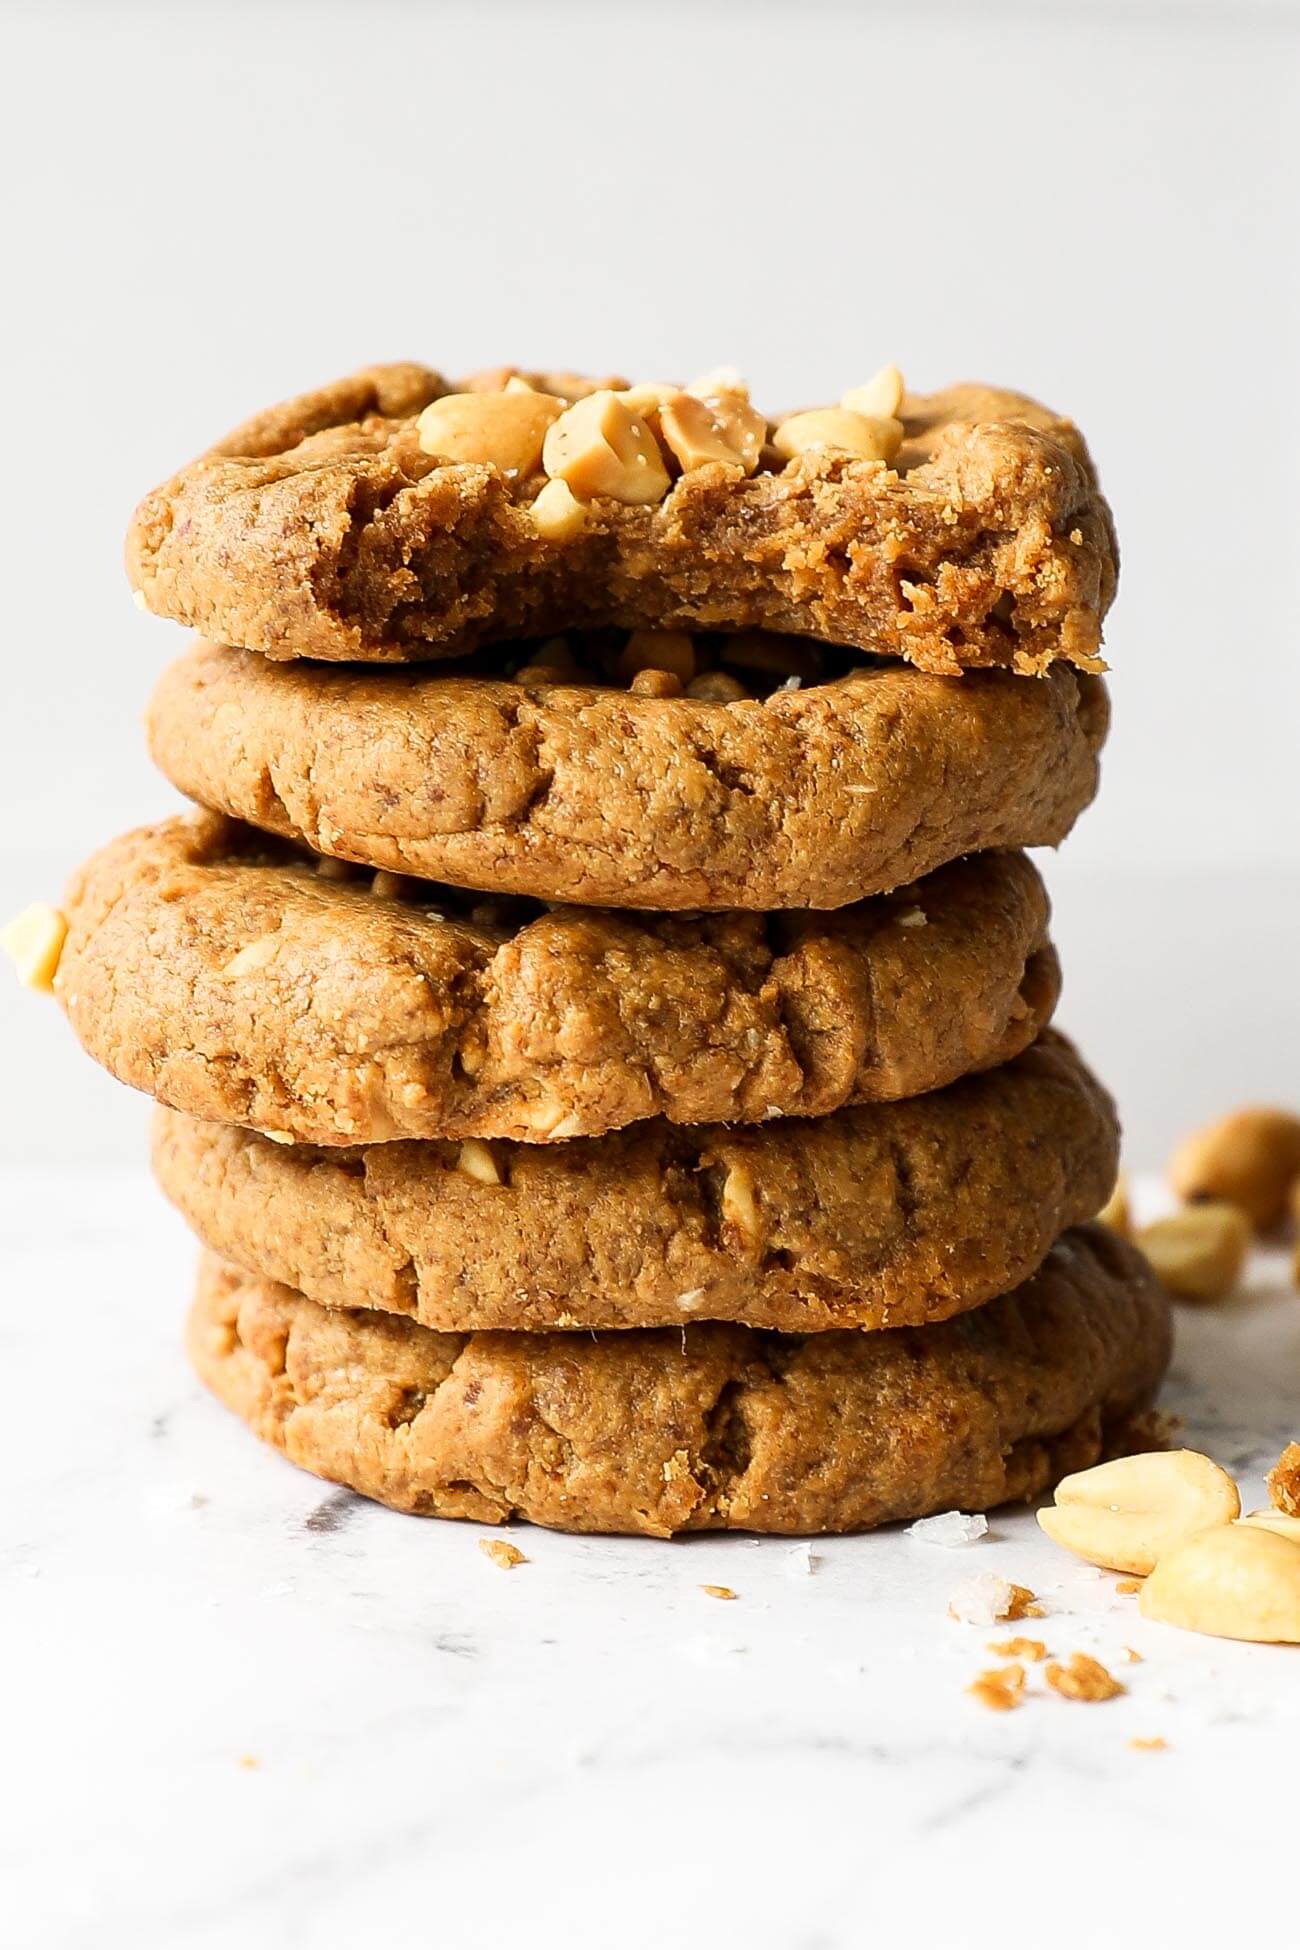 Image of a stack of five gluten free peanut butter cookies with the top cookie having a bite taken out of it.